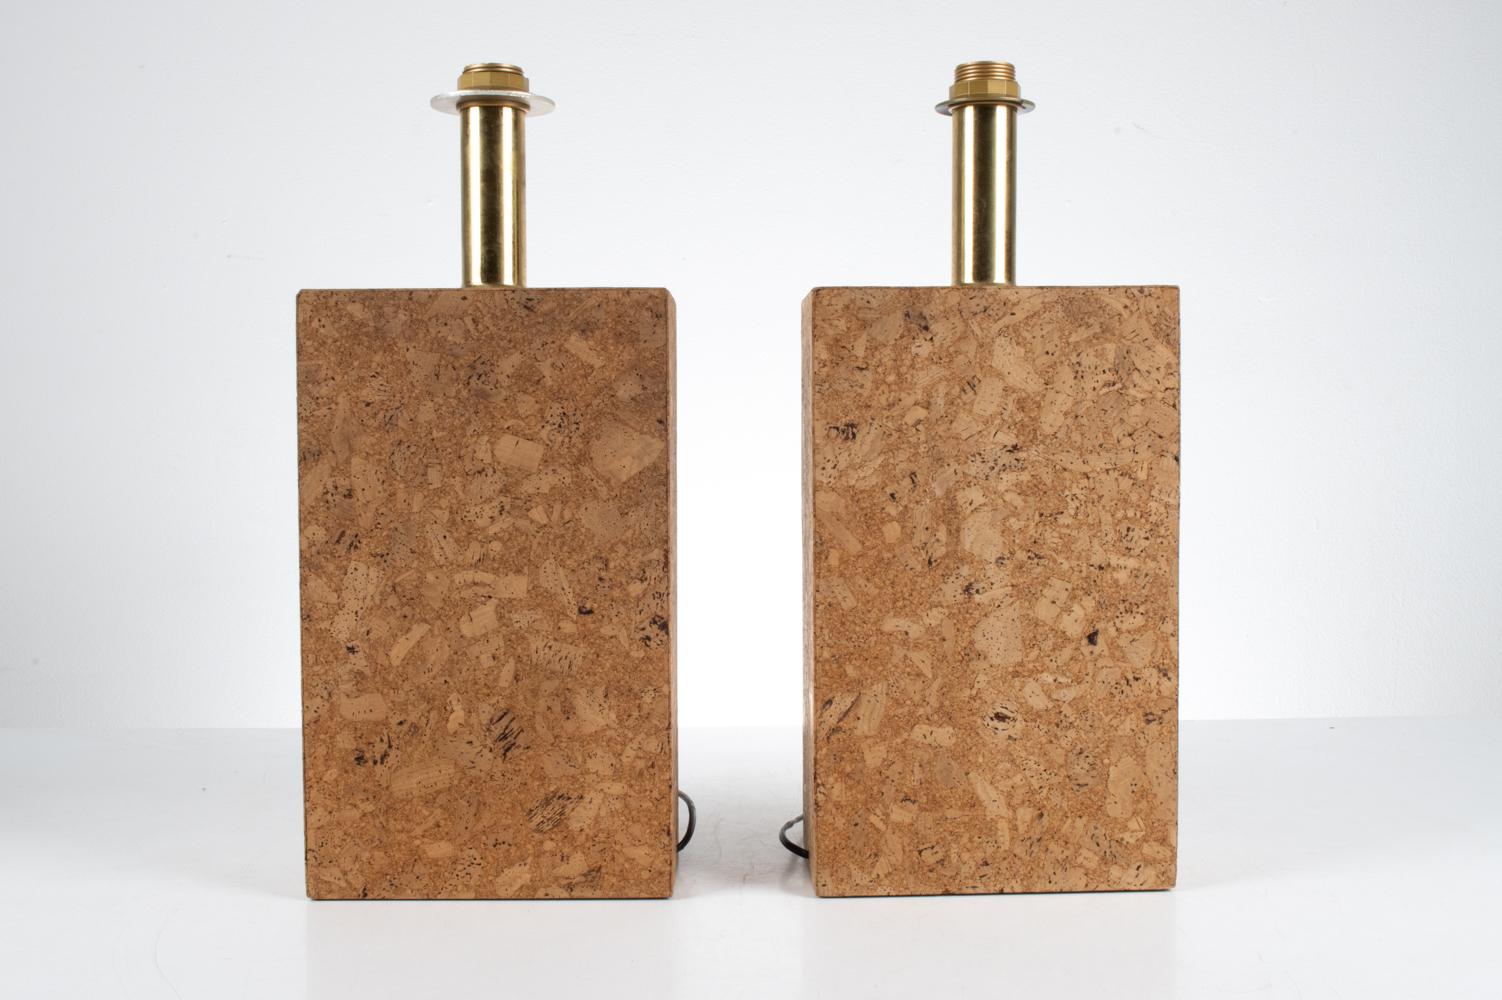 Pair of Cork Monolith Table Lamps in the Stye of Ingo Maurer, c. 1970's For Sale 6